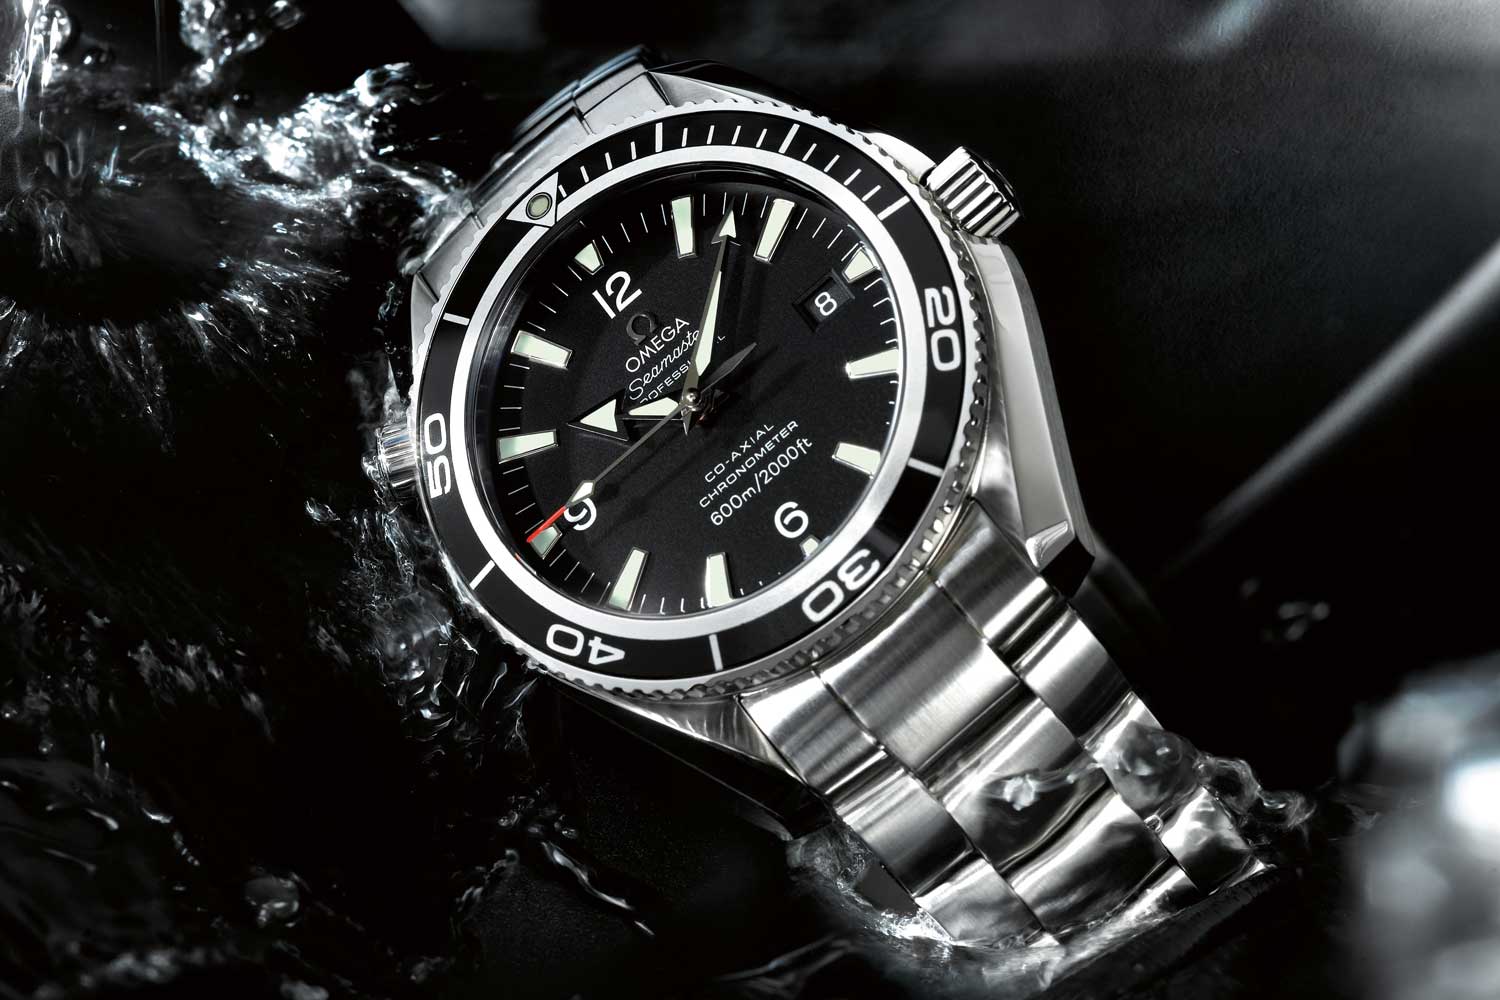 Seamaster Planet Ocean 600M 42mm worn by Bond in Quantum of Solace (2008)